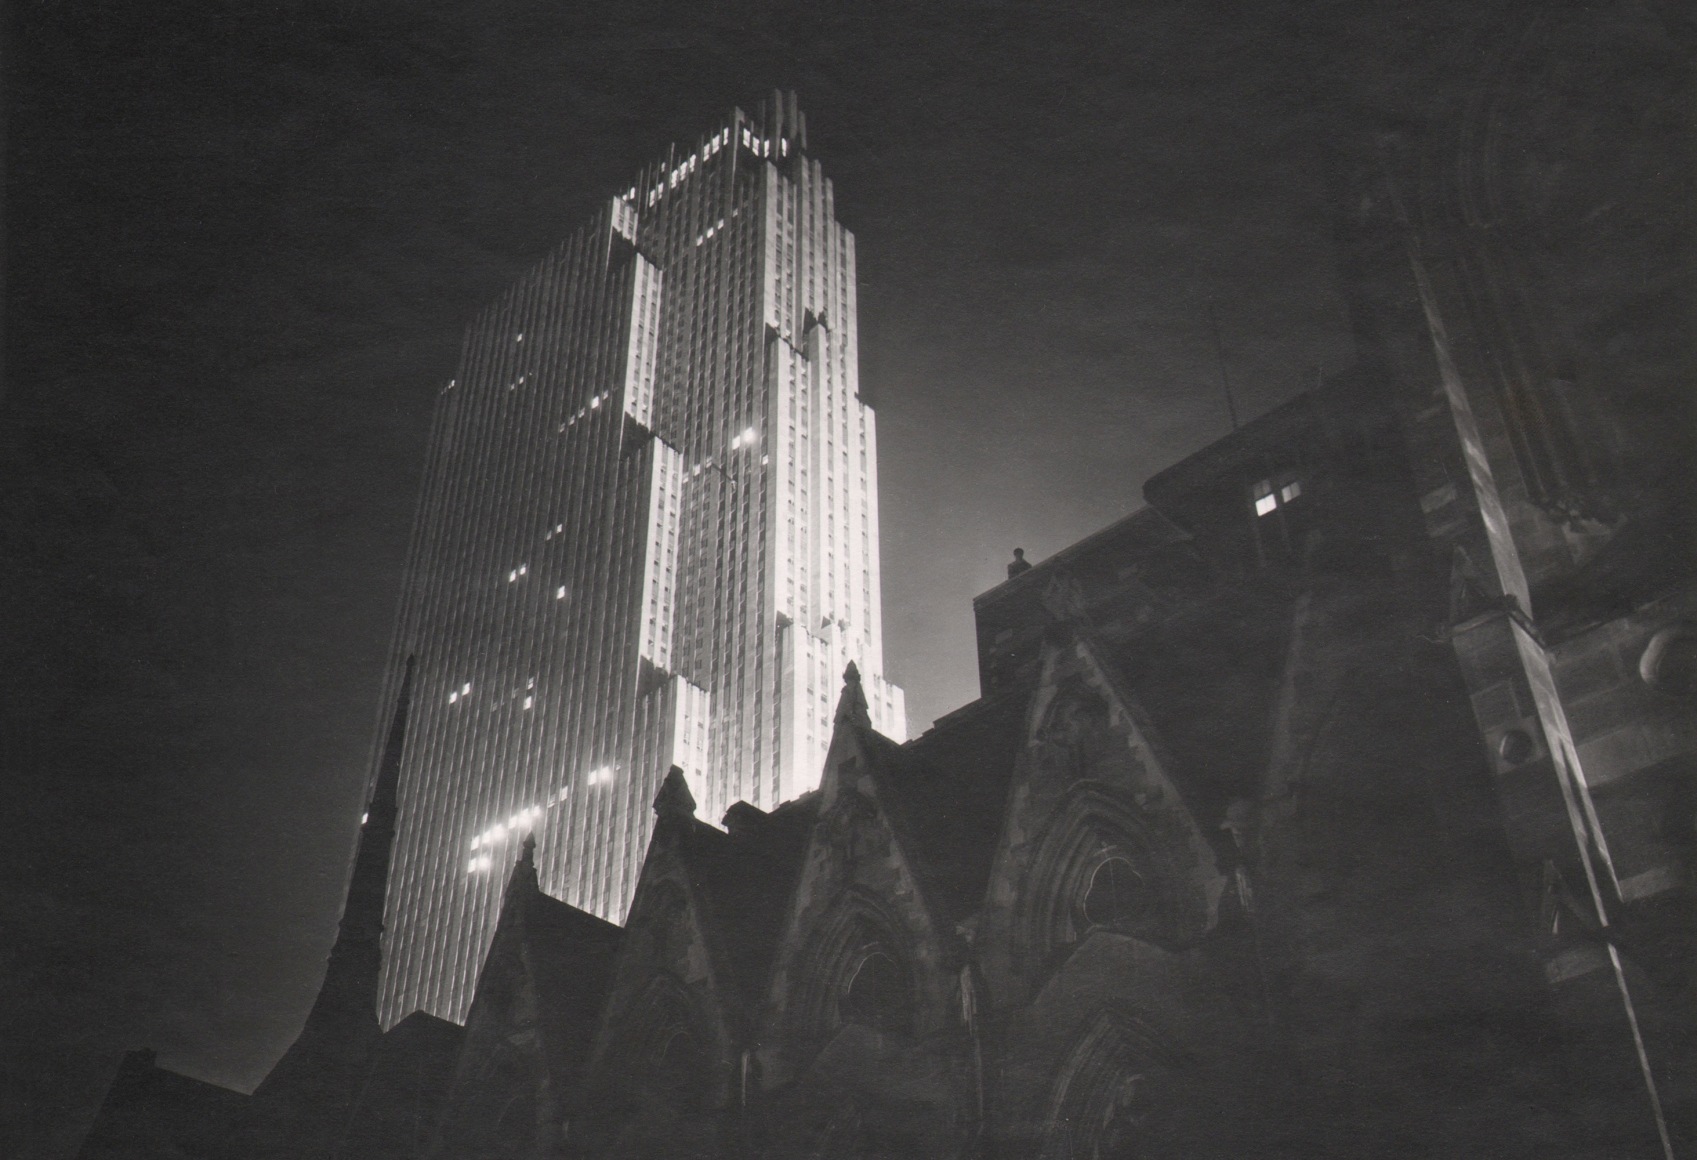 Paul J. Woolf, RCA Building at Night, ​c. 1936. Silhouetted cathedral in the foreground against the tall RCA Building rising up on the center left of the frame.